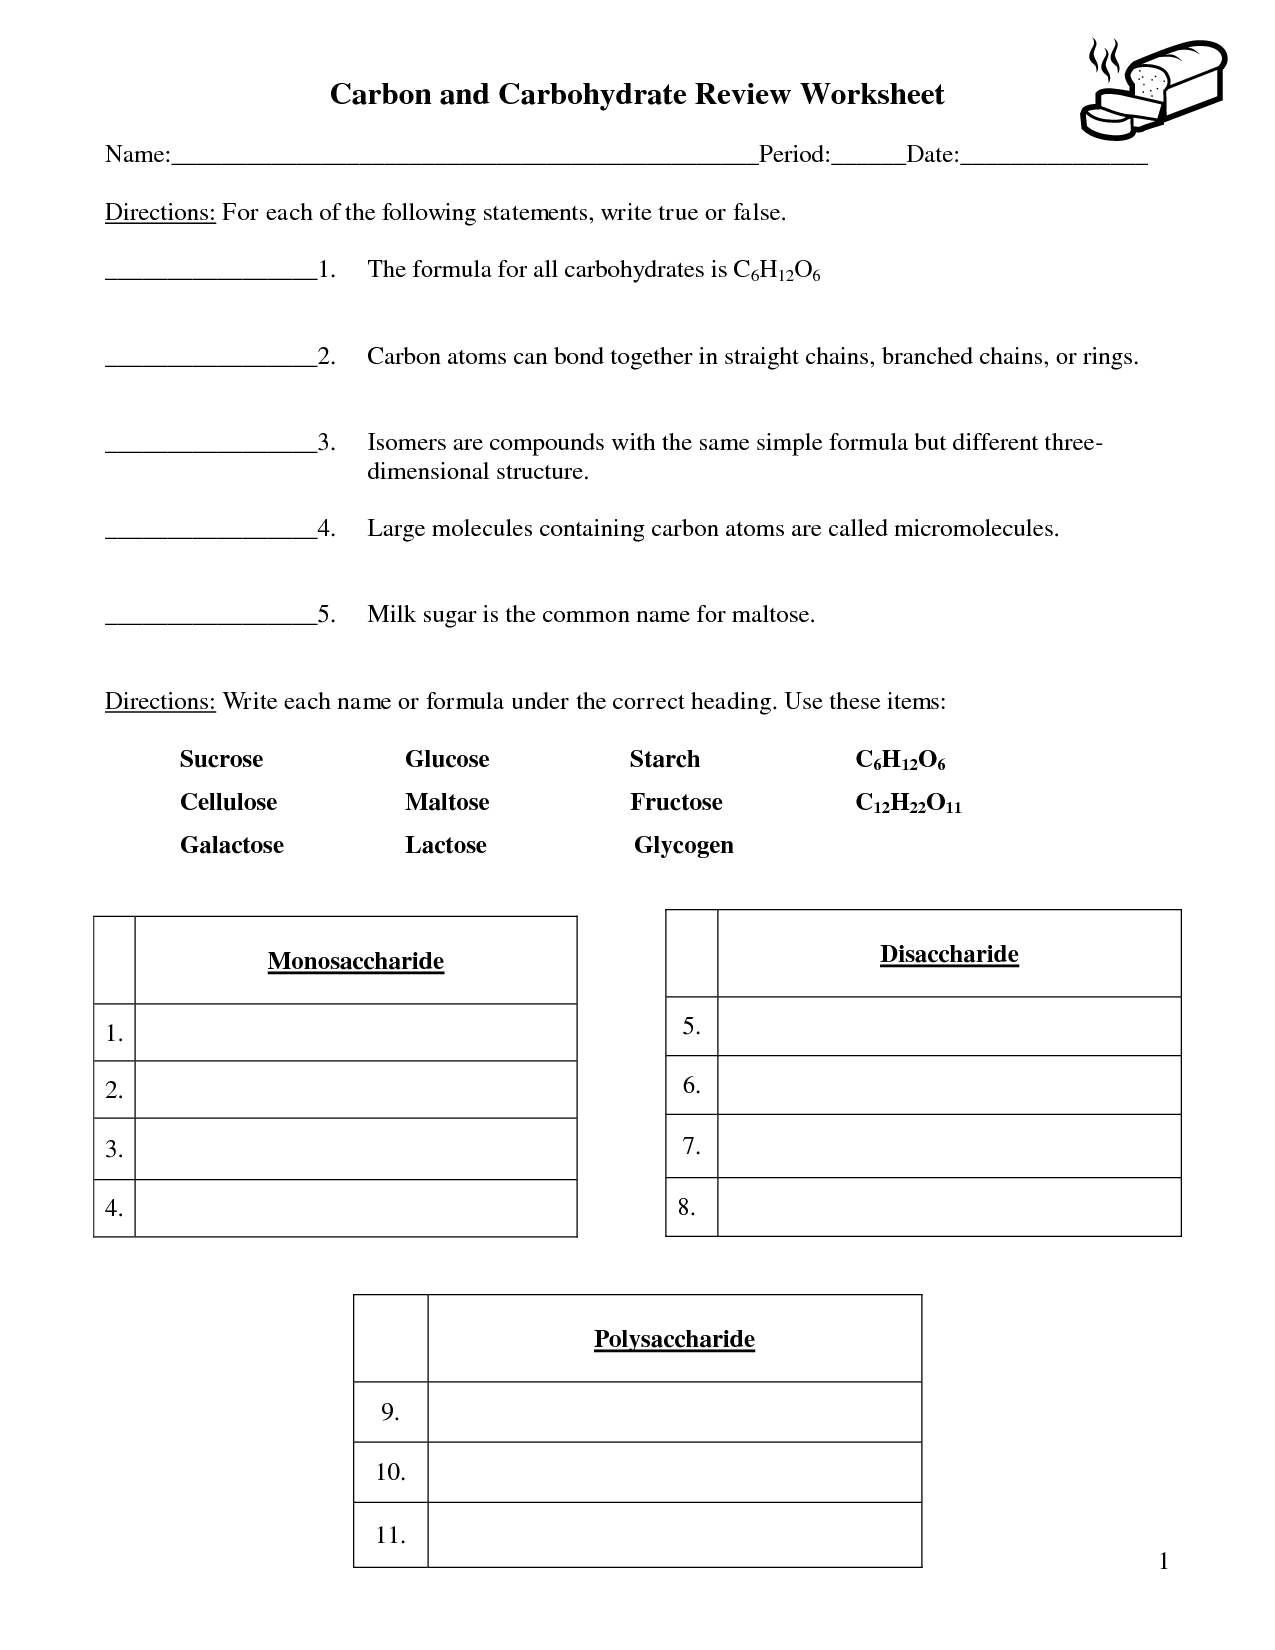 honors-biology-worksheet-carbohydrates-free-download-qstion-co